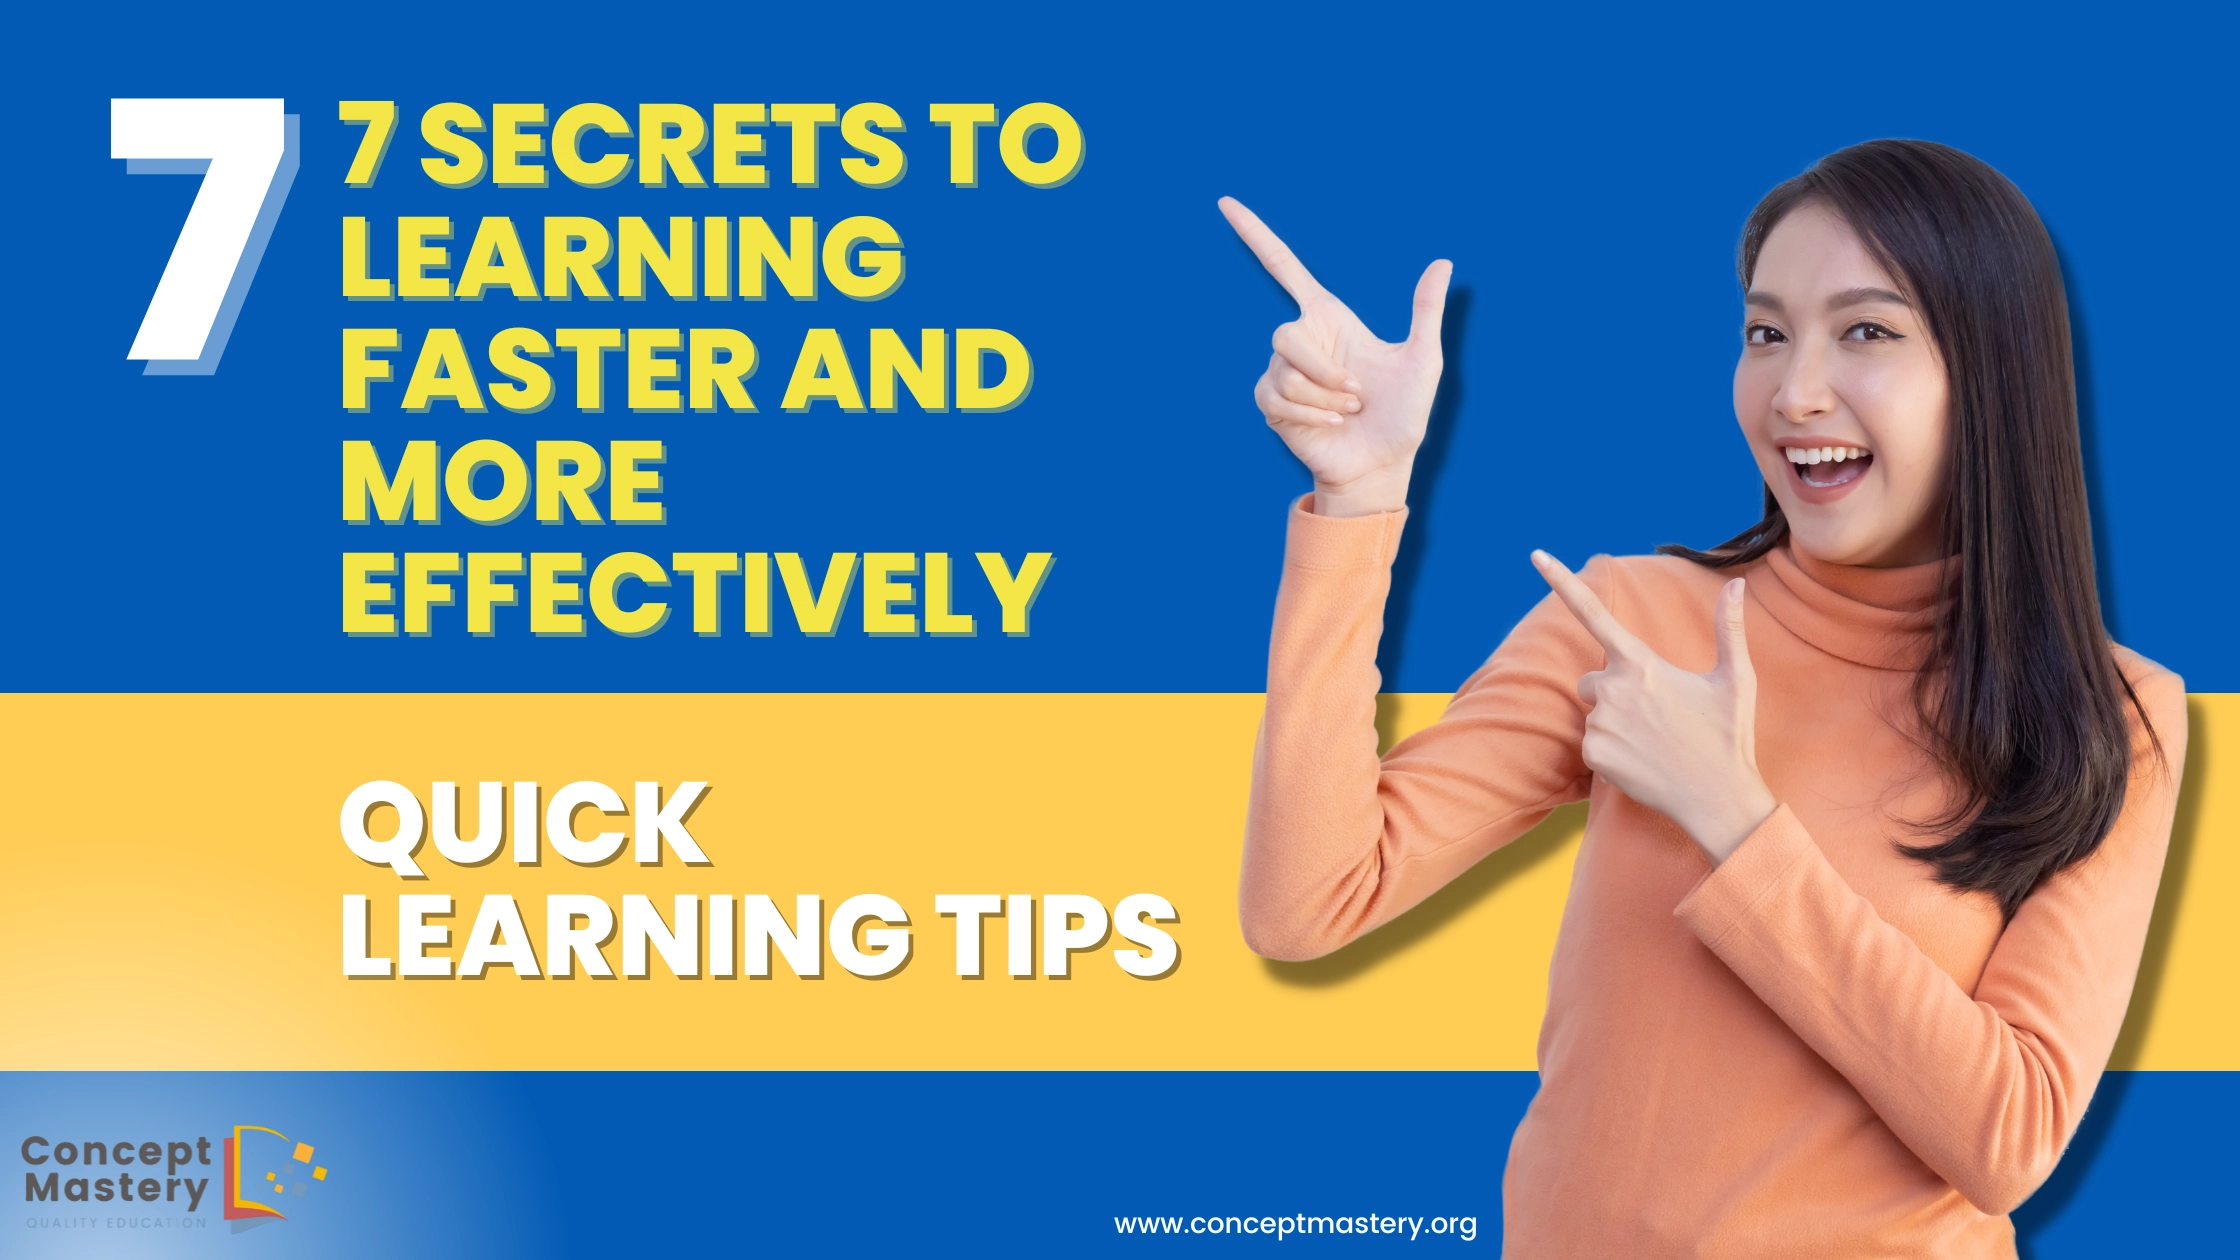 Quick Learning Tips